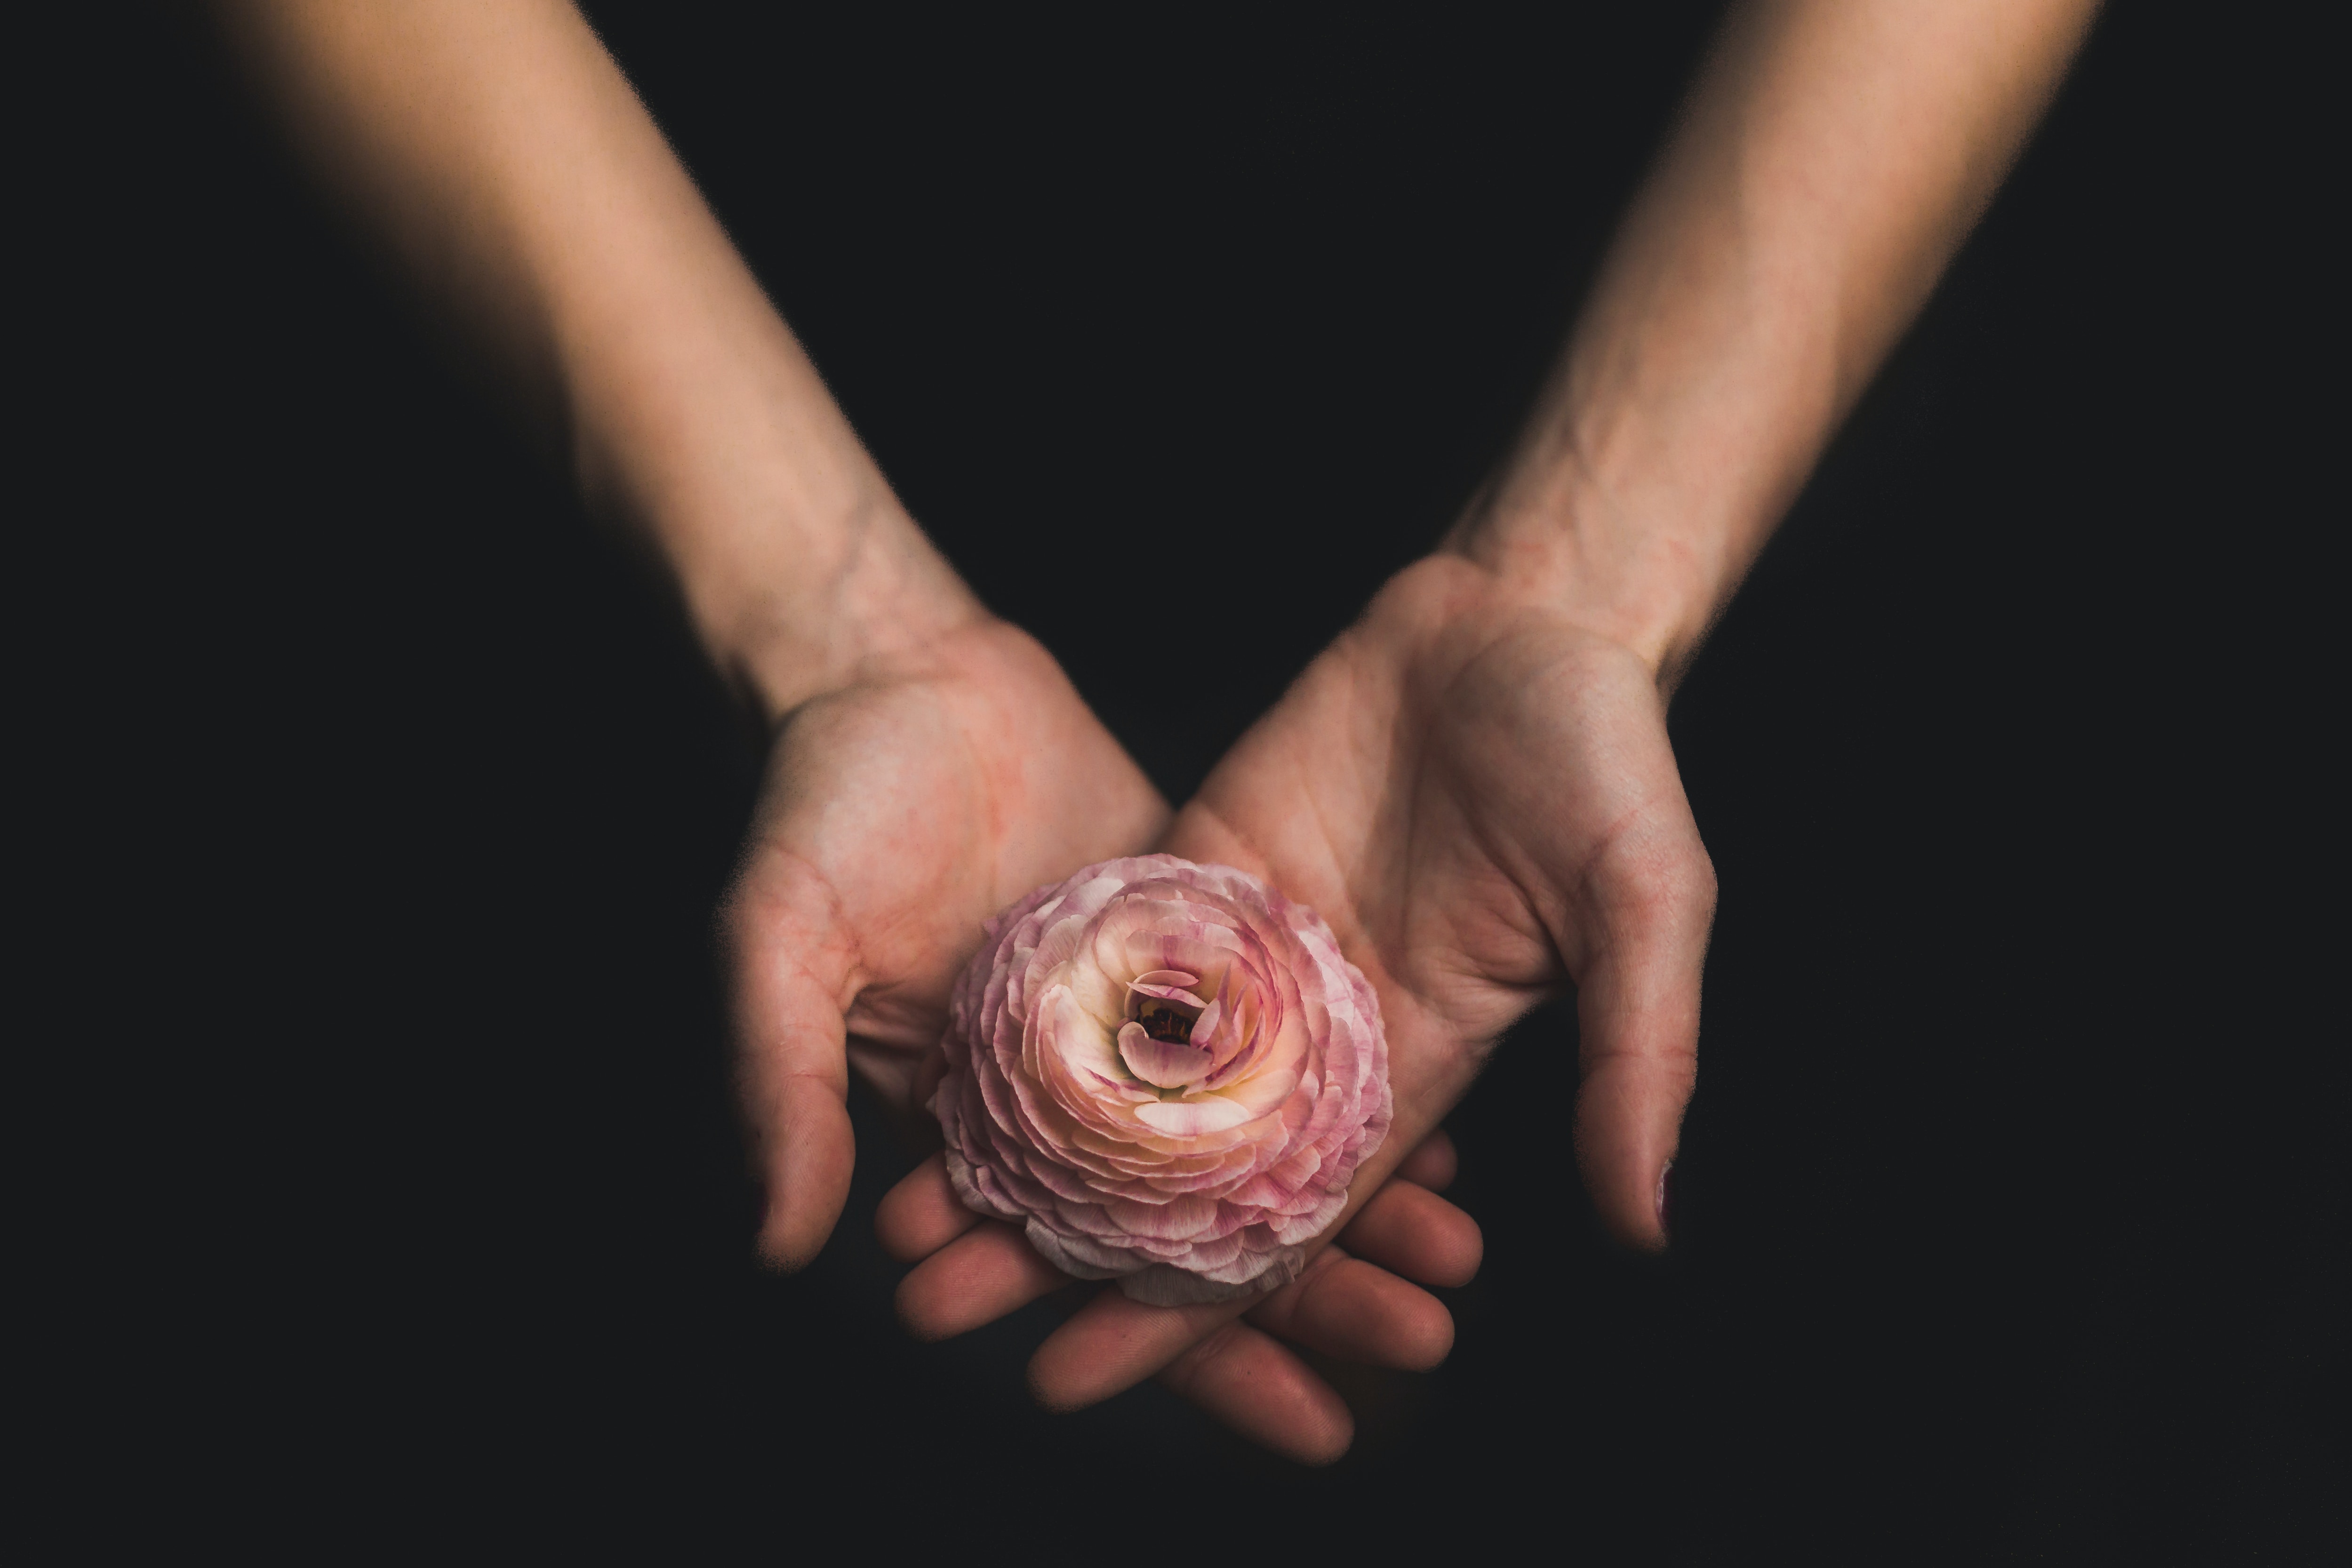 Hands holding out a rose. | Source: Pexels